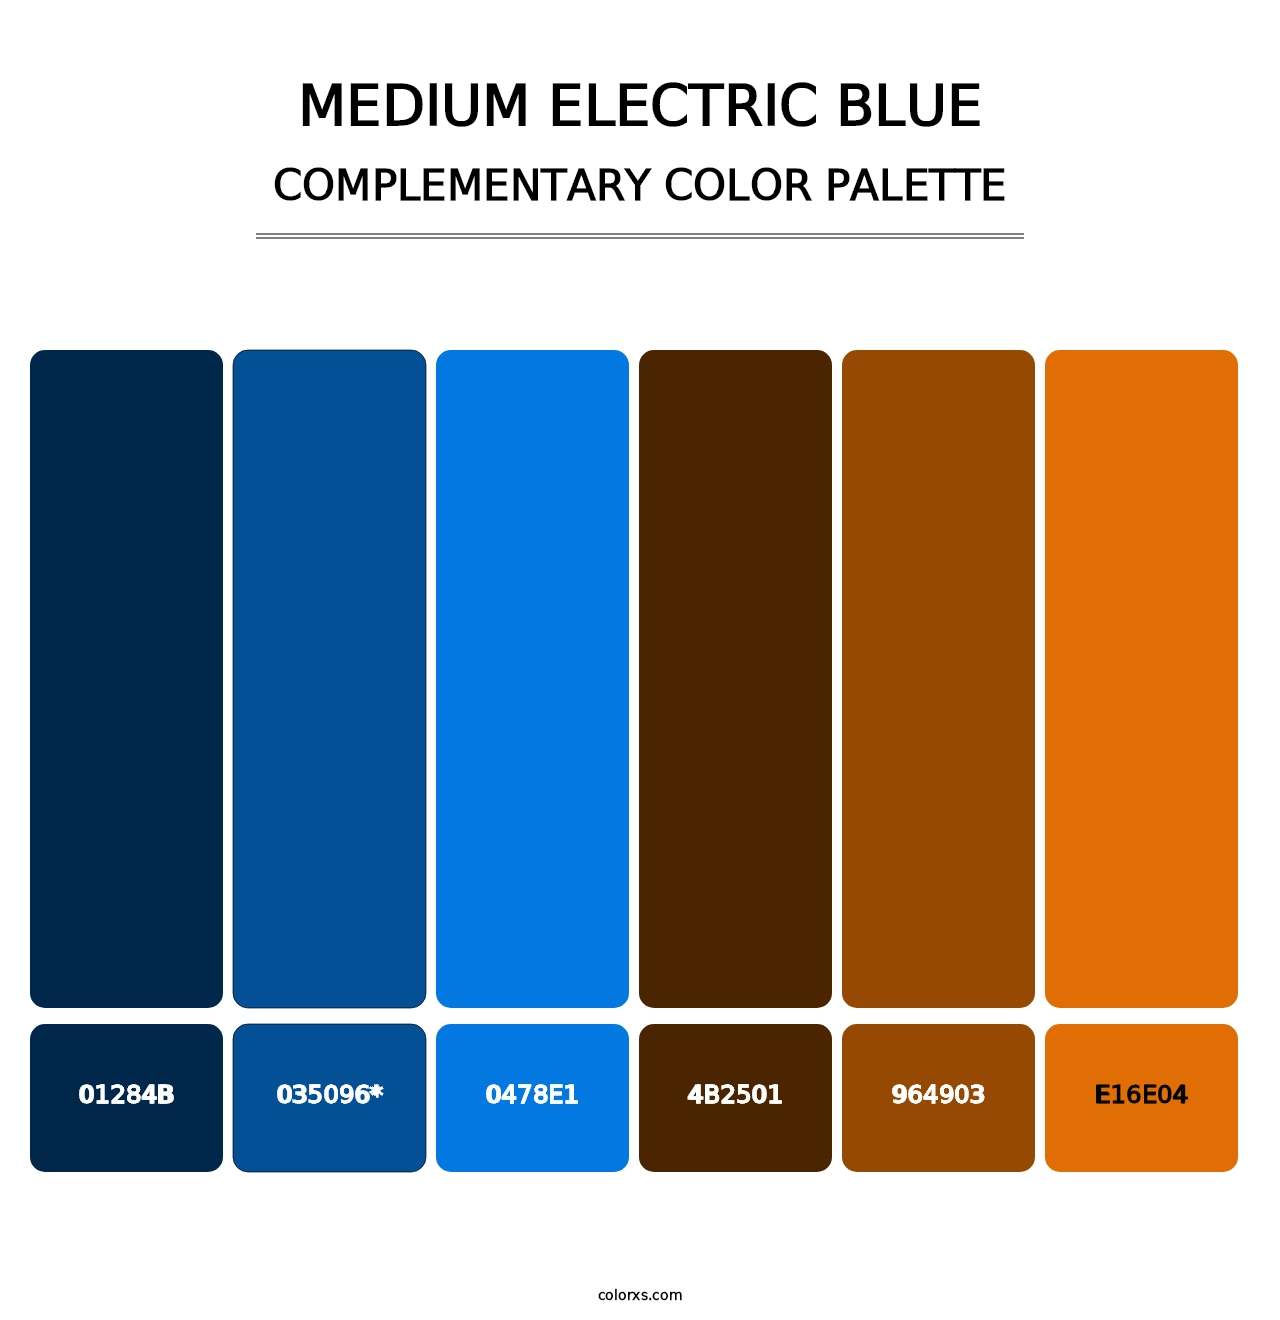 Medium Electric Blue - Complementary Color Palette